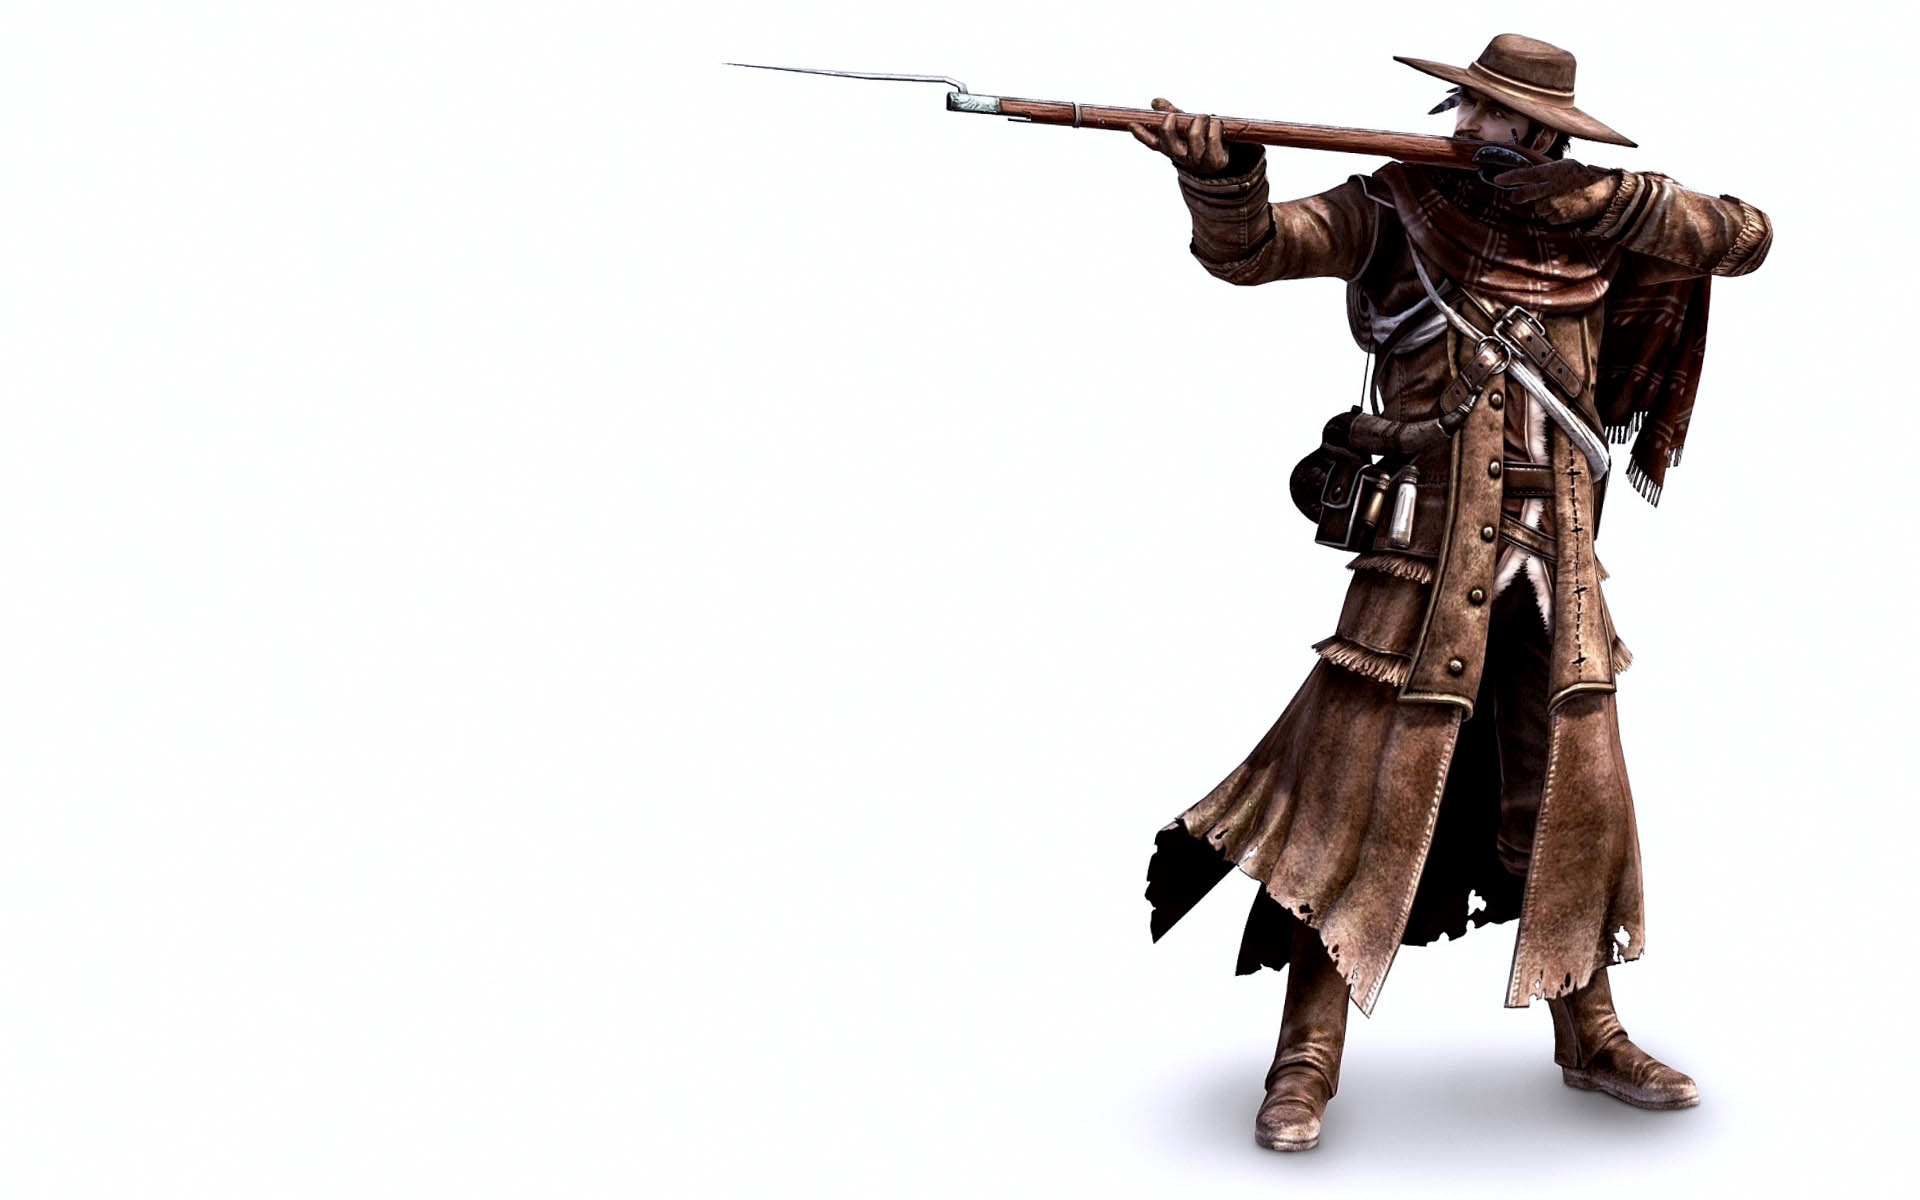 Fantasy Cowboy Snipers 3D Picture Wallpaper